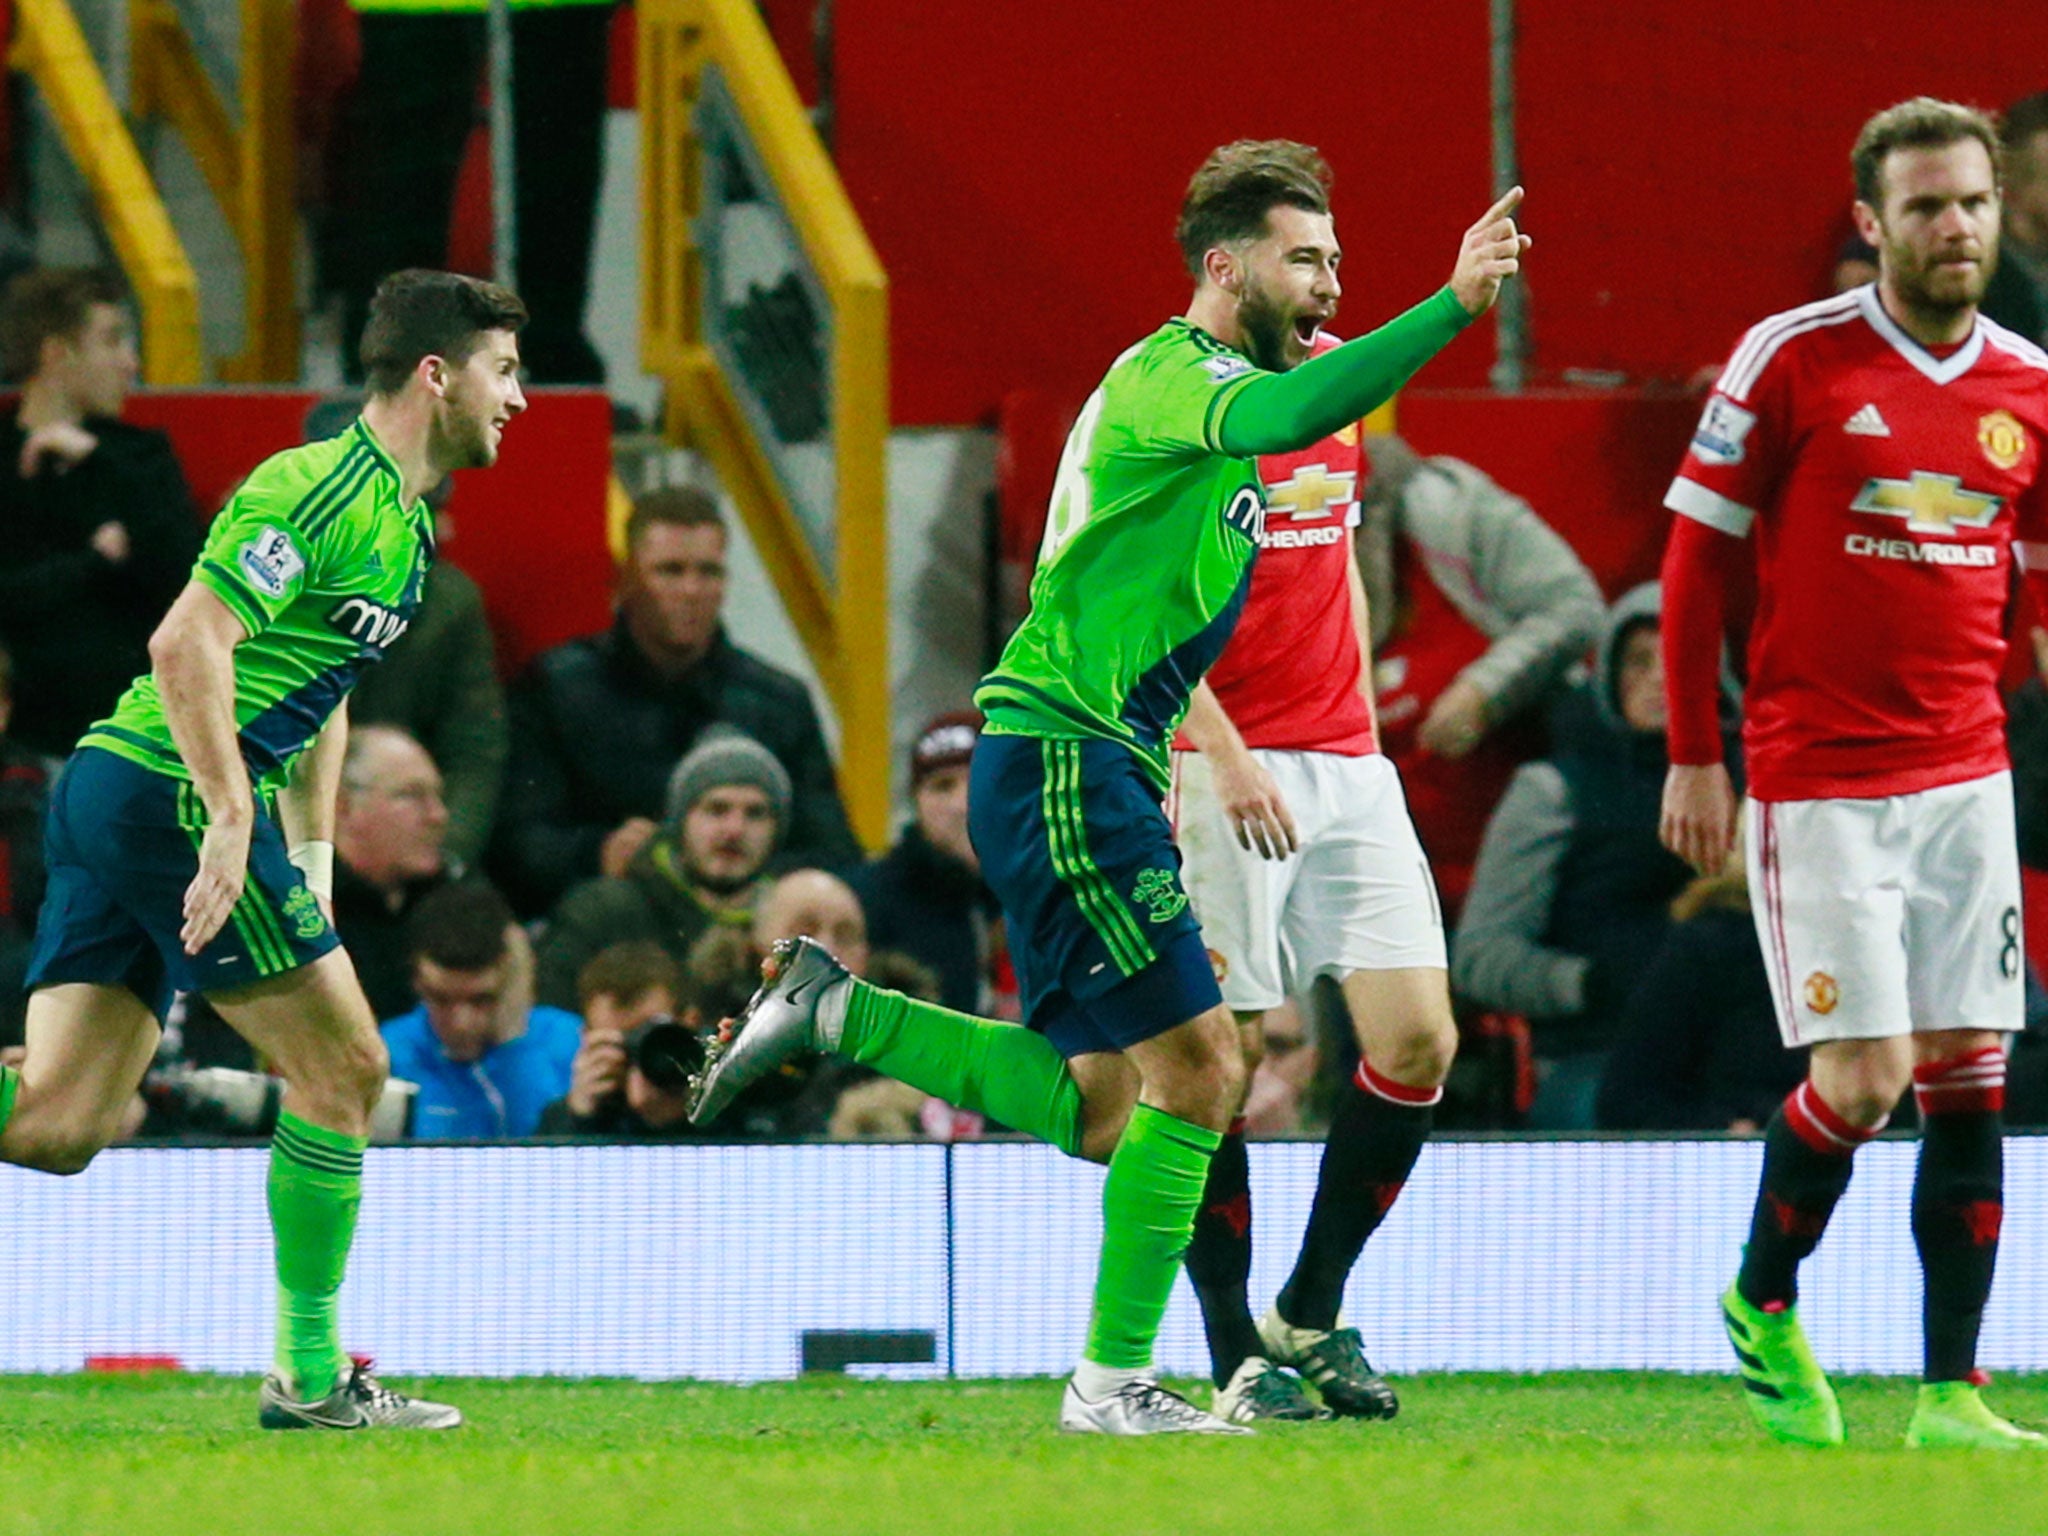 Charlie Austin celebrates scoring the winning goal on his Southampton debut against Manchester United